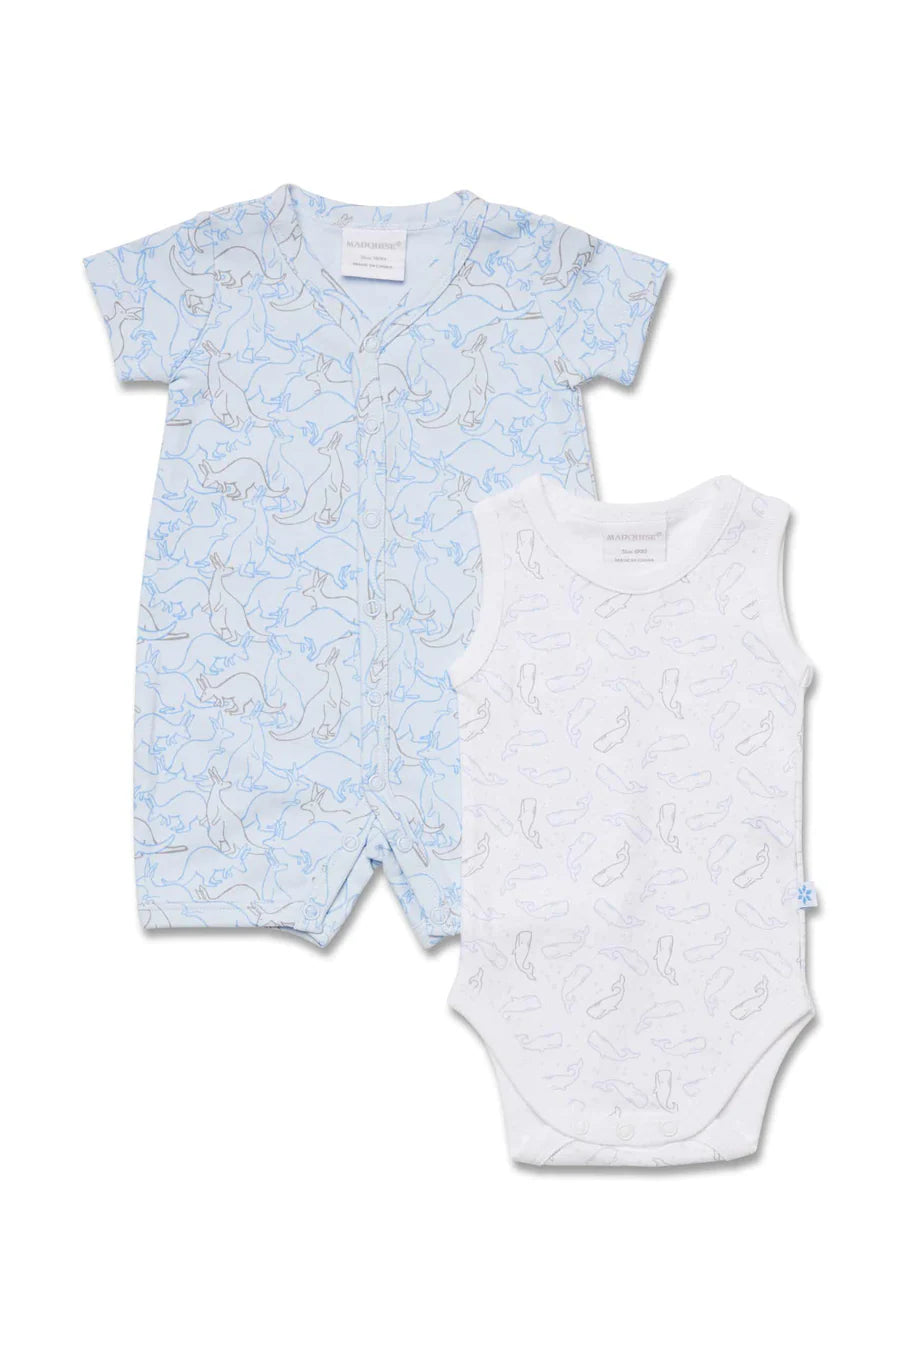 Marquise Kangaroo Romper And Whale Bodysuit 2 Pack - Blue